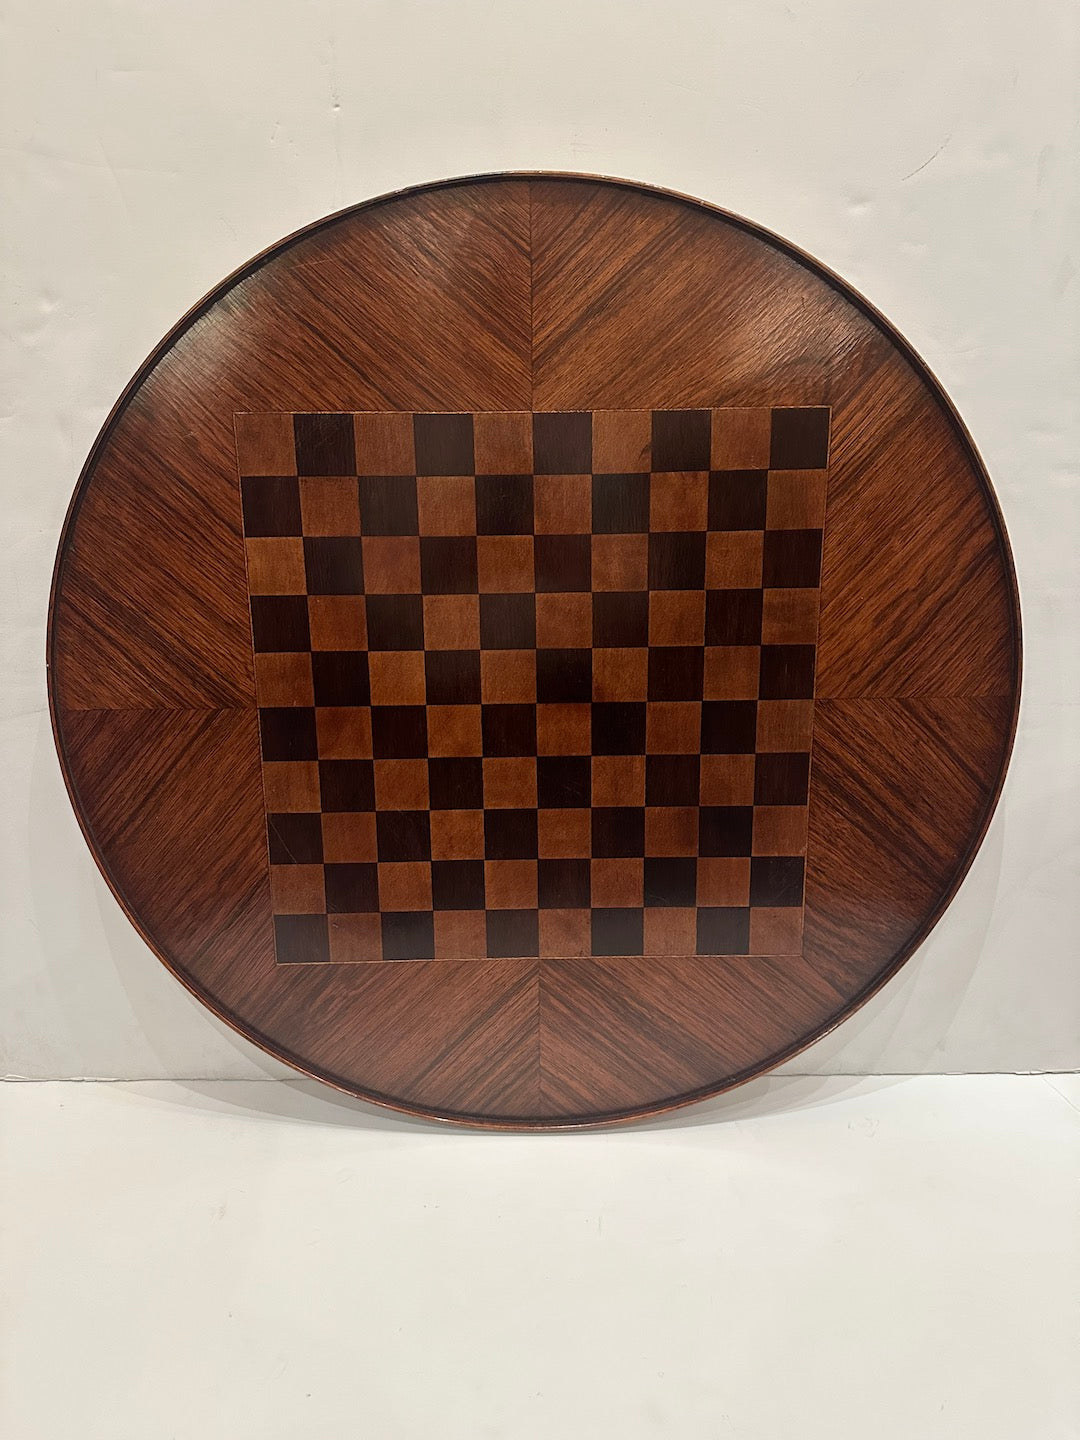 Parquetry Flip-Top Games Table